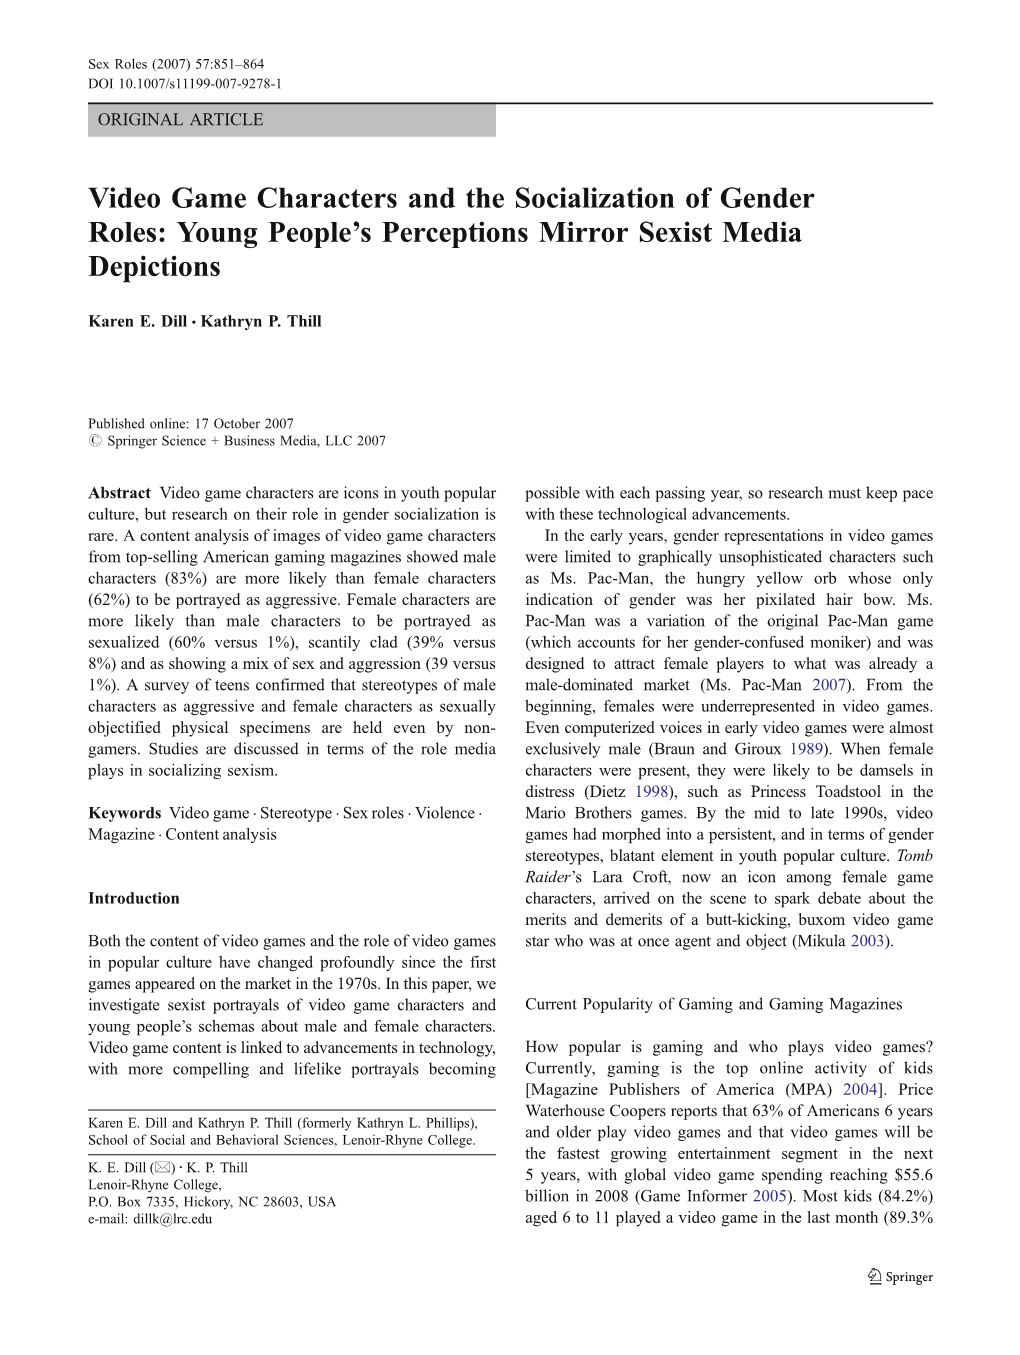 Video Game Characters and the Socialization of Gender Roles: Young People’S Perceptions Mirror Sexist Media Depictions